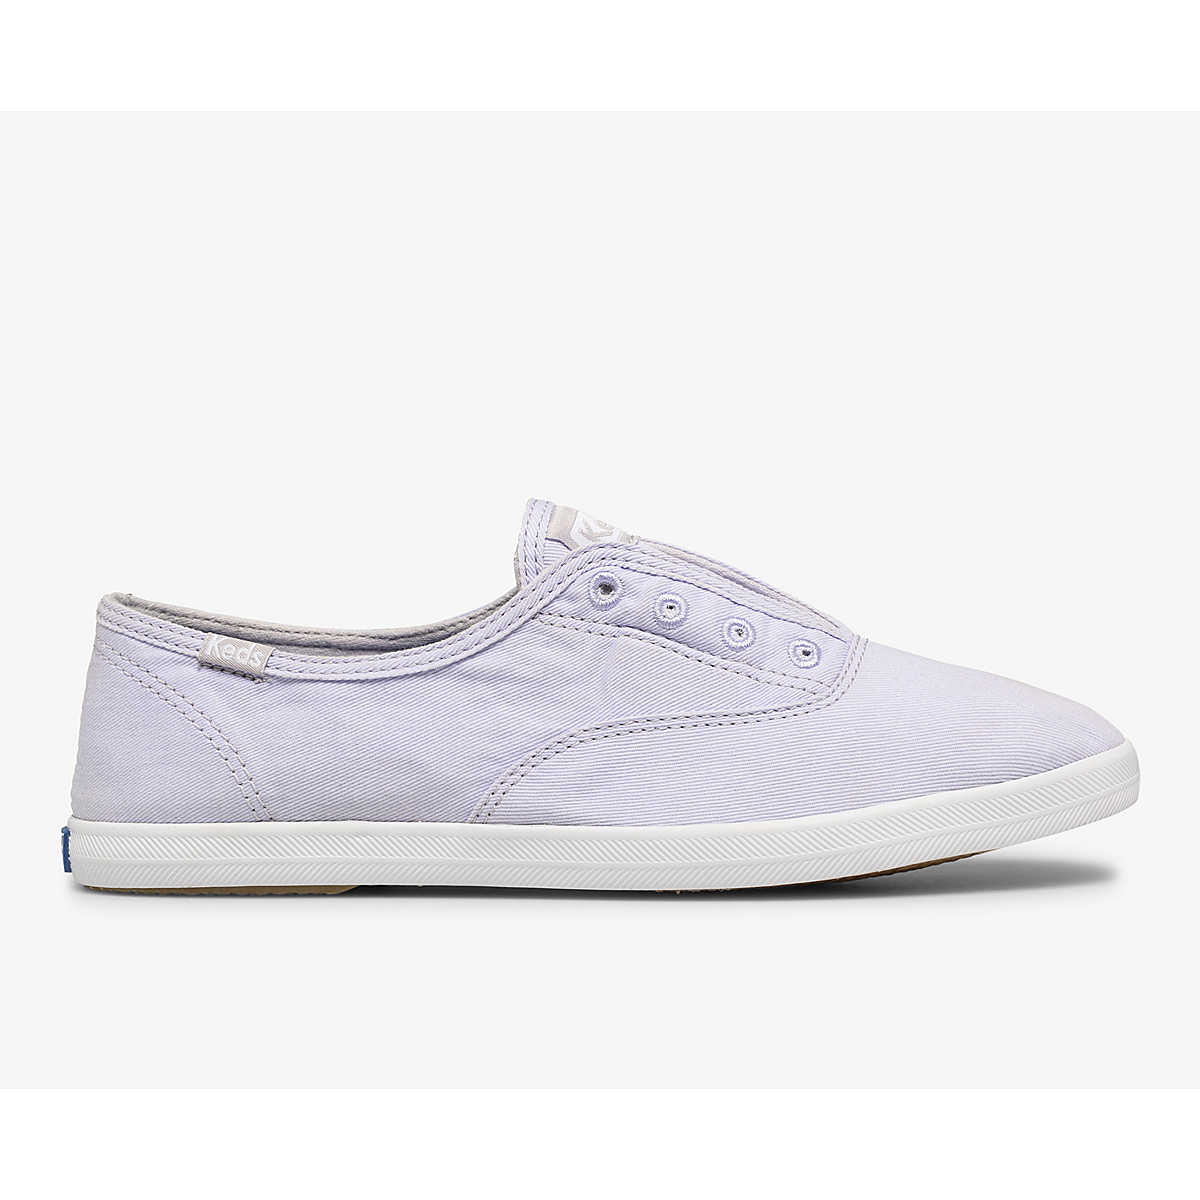 Keds Chillax Washable Feat. Organic Cotton In Lavender